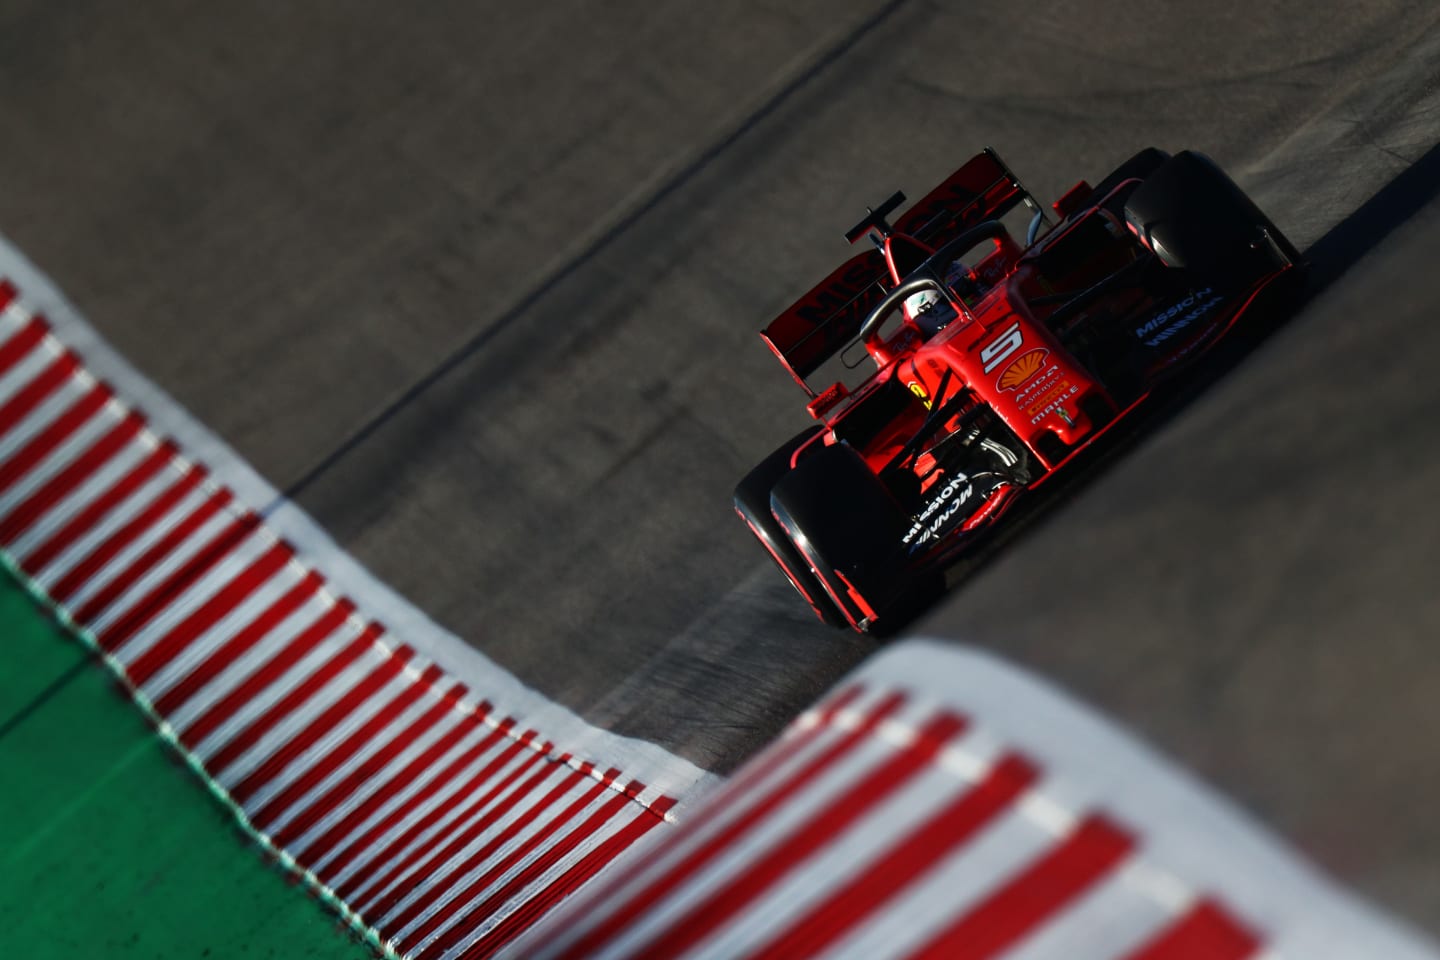 AUSTIN, TEXAS - NOVEMBER 02: Sebastian Vettel of Germany driving the (5) Scuderia Ferrari SF90 on track during qualifying for the F1 Grand Prix of USA at Circuit of The Americas on November 02, 2019 in Austin, Texas. (Photo by Dan Istitene/Getty Images)